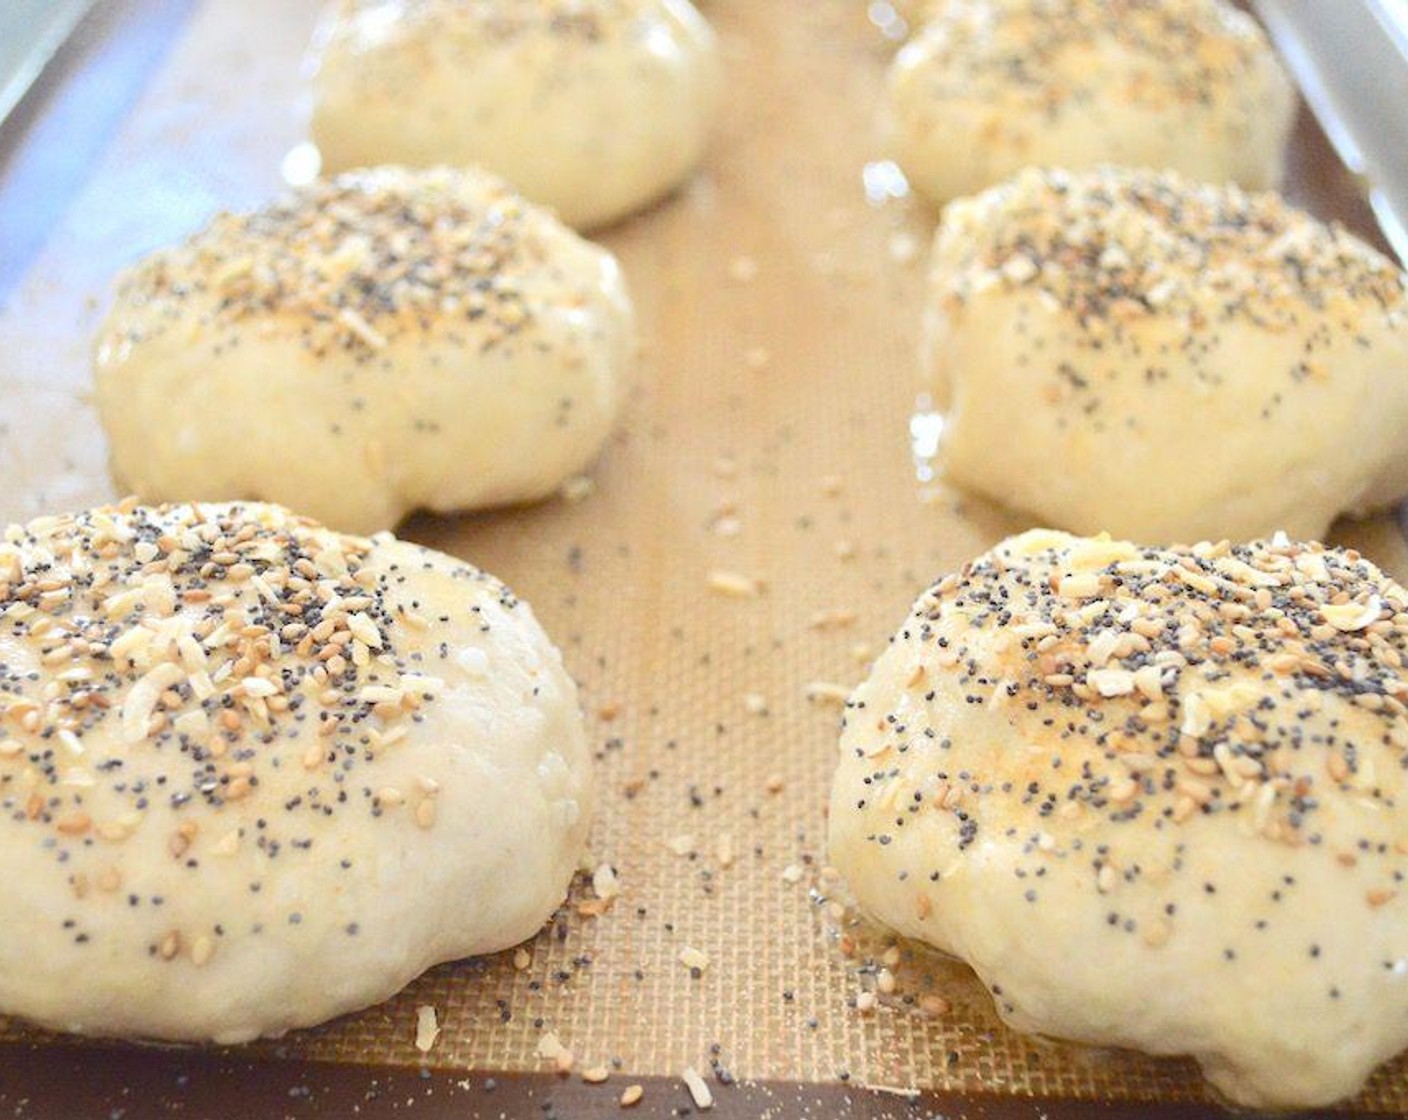 step 7 Then stir the Poppy Seeds (1 tsp), Sesame Seeds (1 tsp), Dried Onions (1 tsp) and McCormick® Garlic Powder (1 tsp) together and sprinkle each bomb generously with that mixture to mimic an everything bagel.